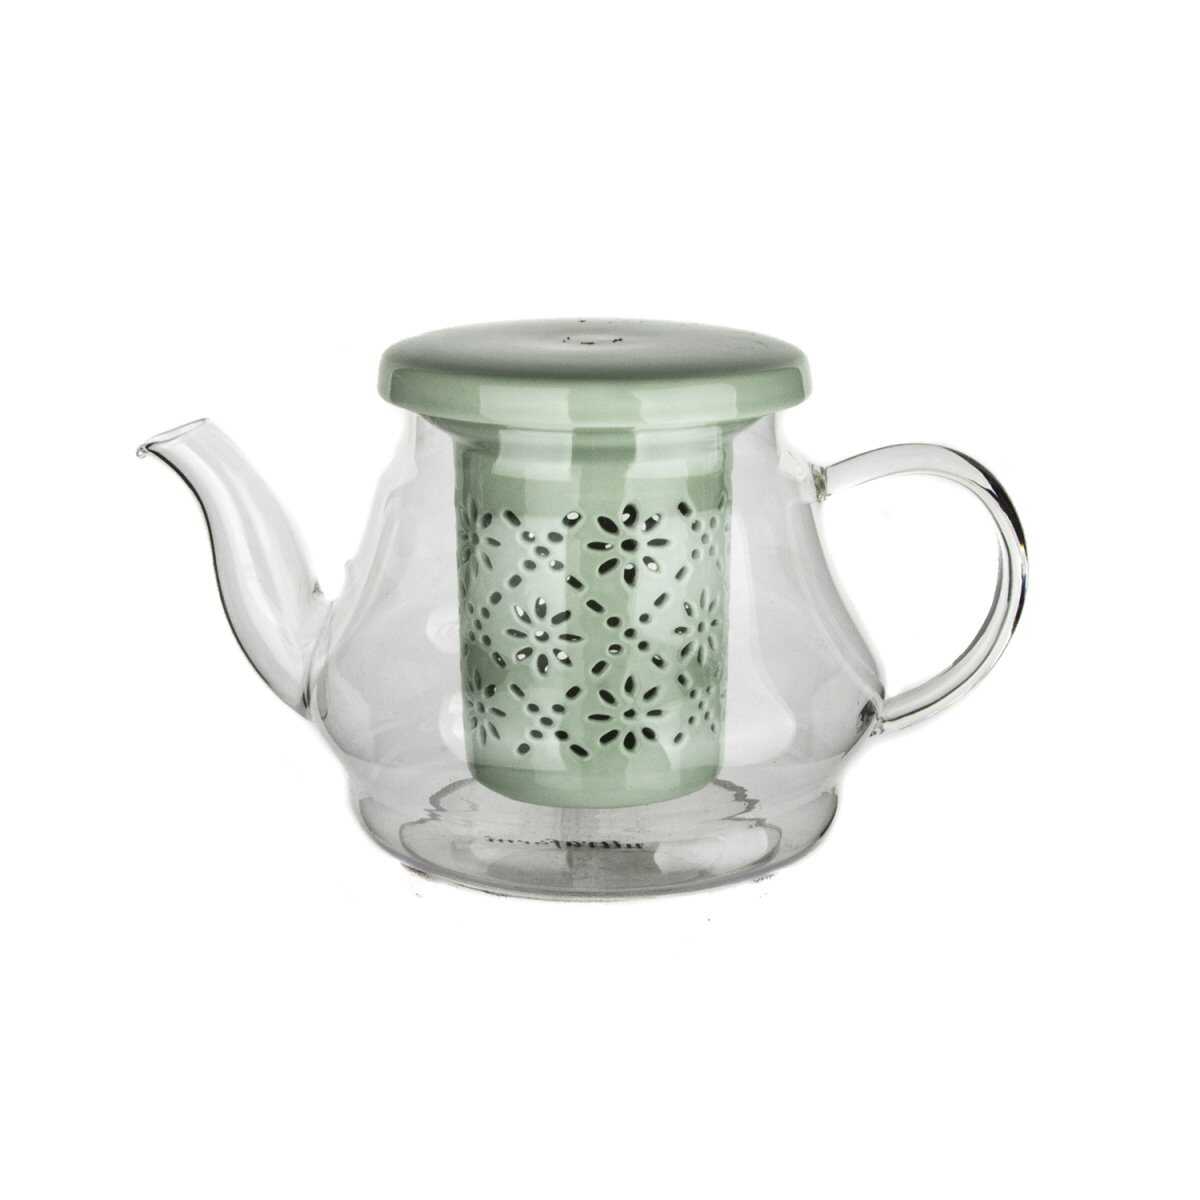 Ultraform Porcelain Teapot with Strainer and Lid Green